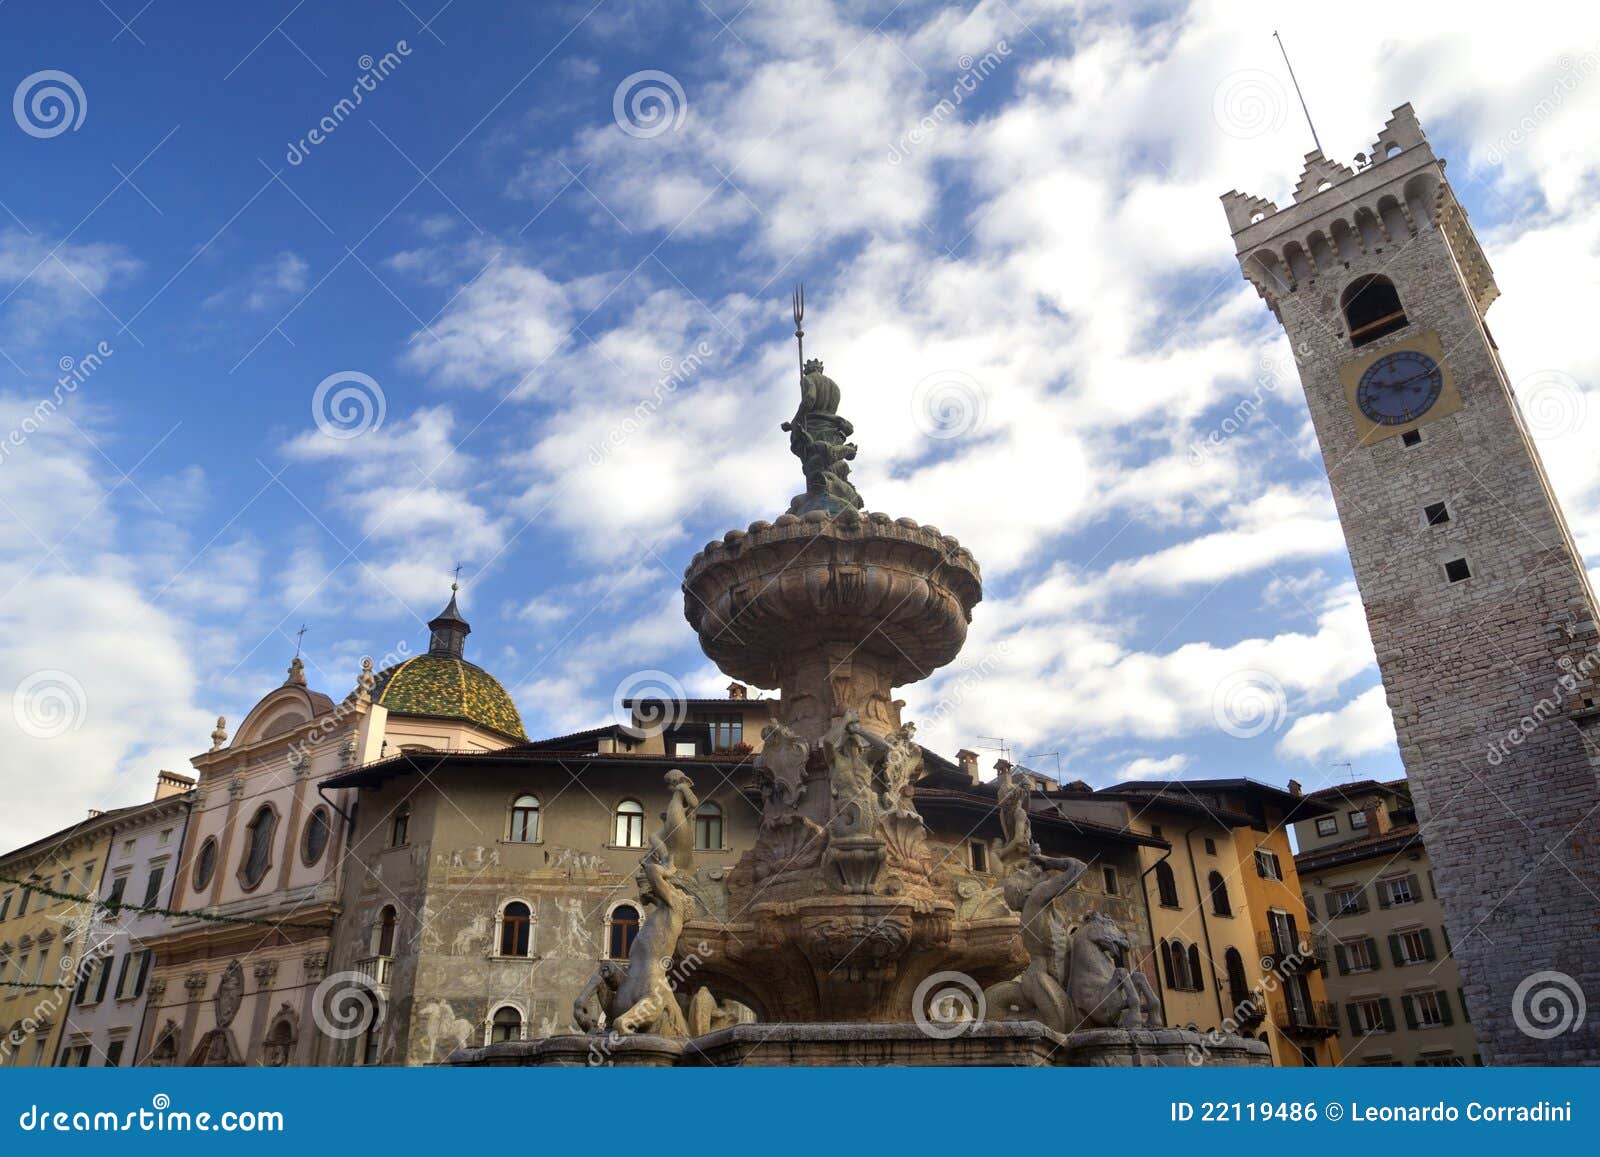 cathedral square in trento, italy